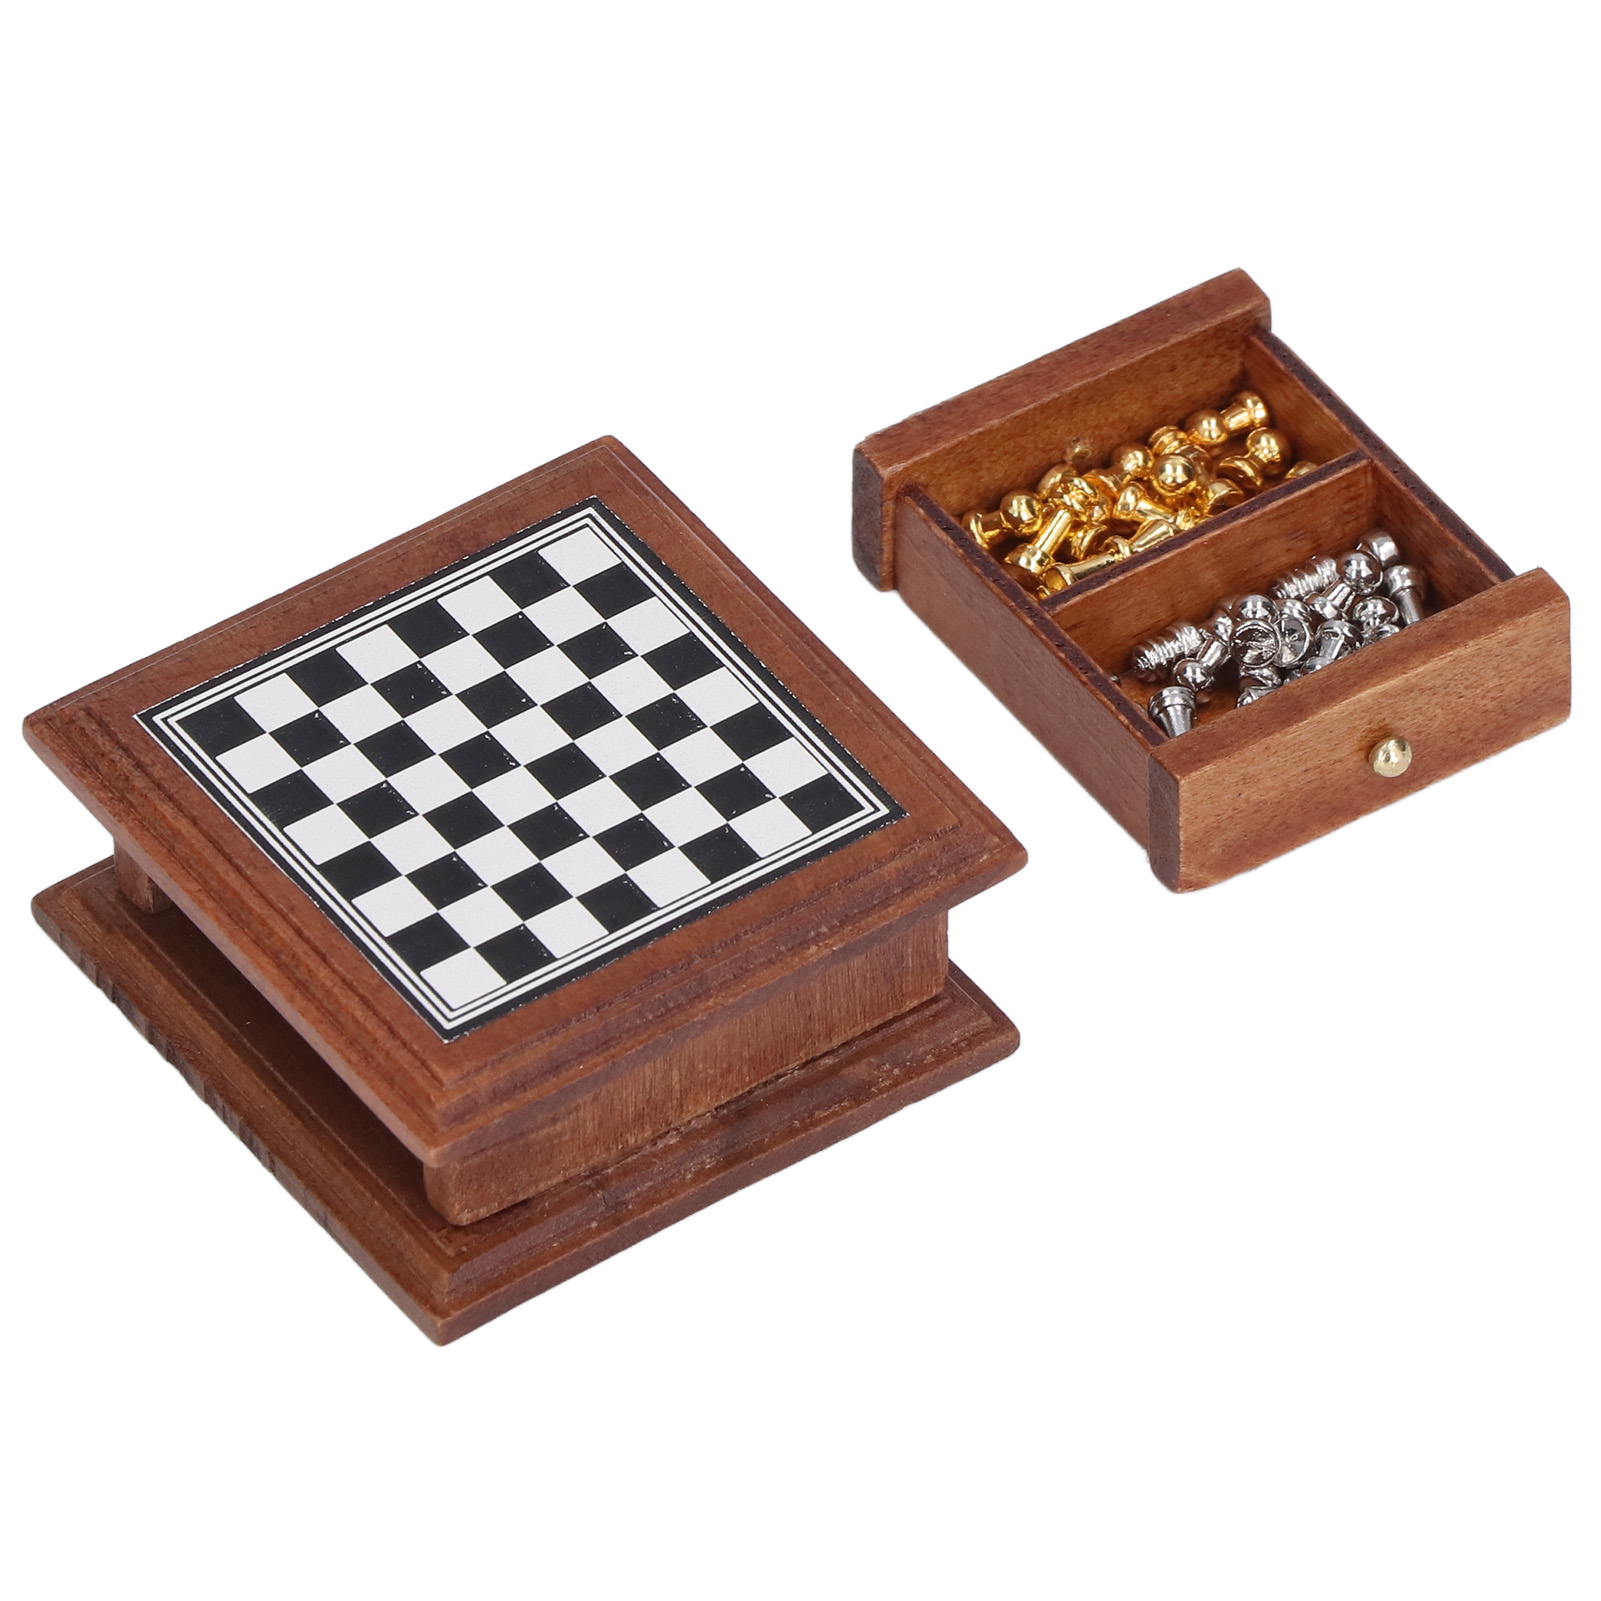 Ymiko Miniature Chess Set 1:12 Doll House Exquisite Mini Chess Set Home Decoration Gift,Chess Table Set,Chess Board Set - image 3 of 8